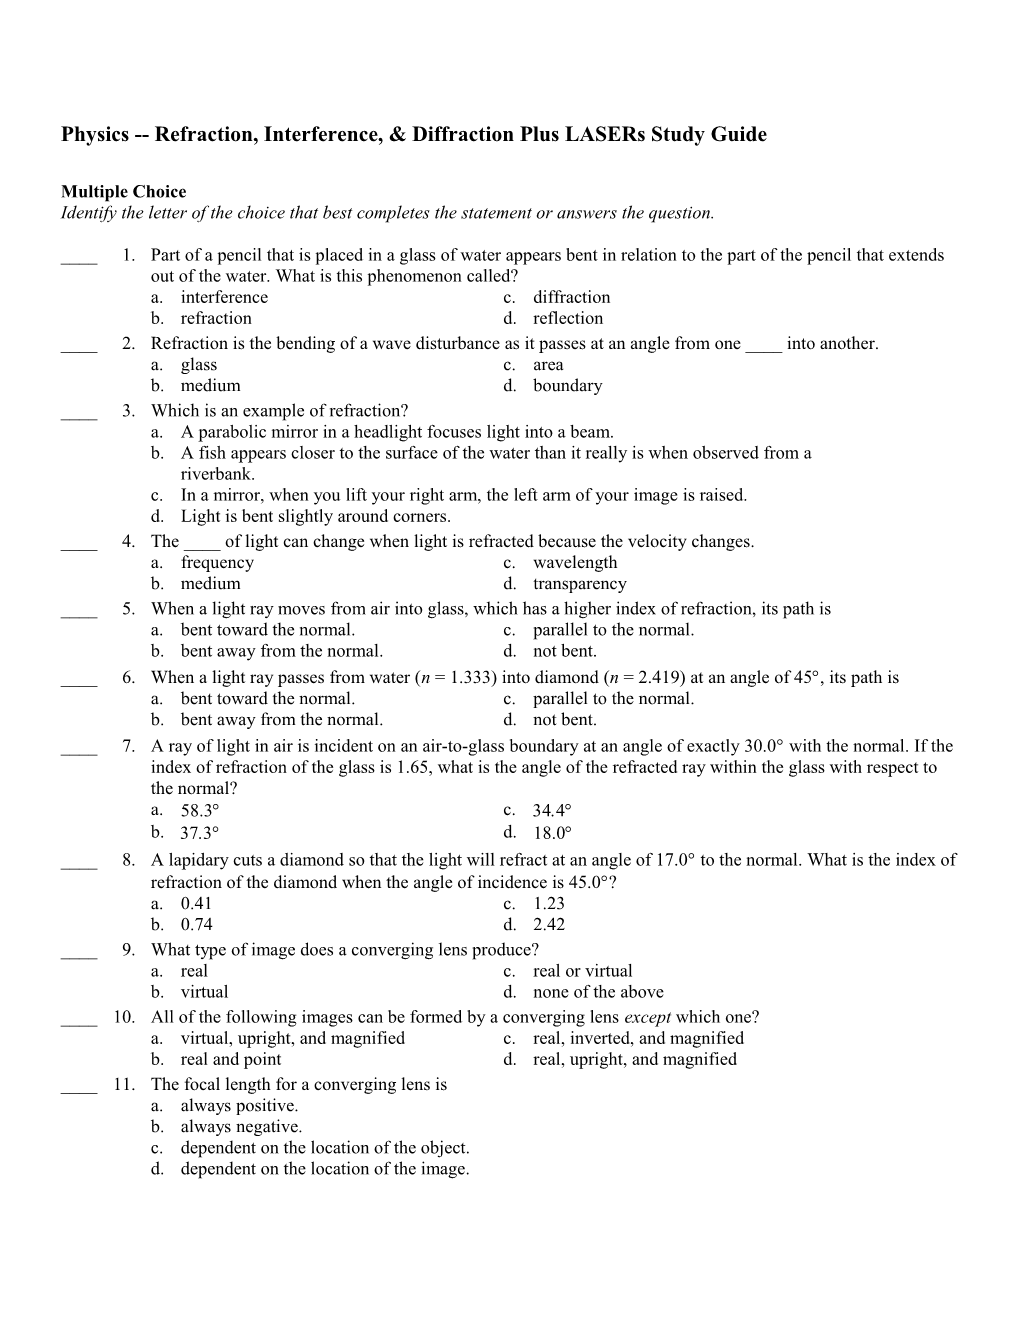 Physics Refraction, Interference, & Diffraction Plus Lasers Study Guide